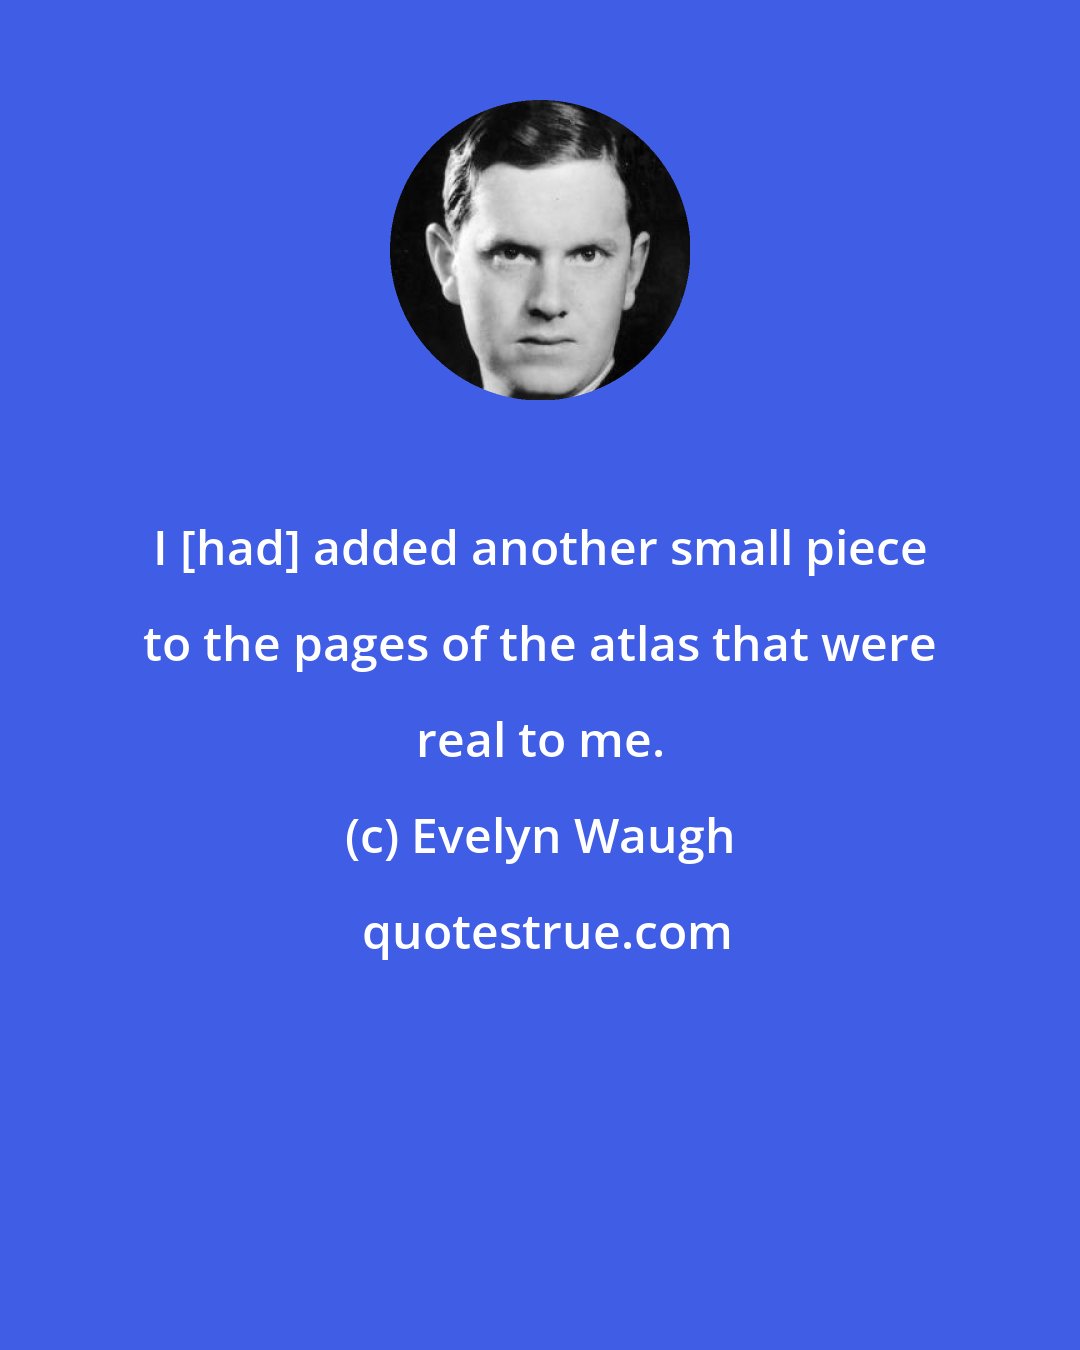 Evelyn Waugh: I [had] added another small piece to the pages of the atlas that were real to me.